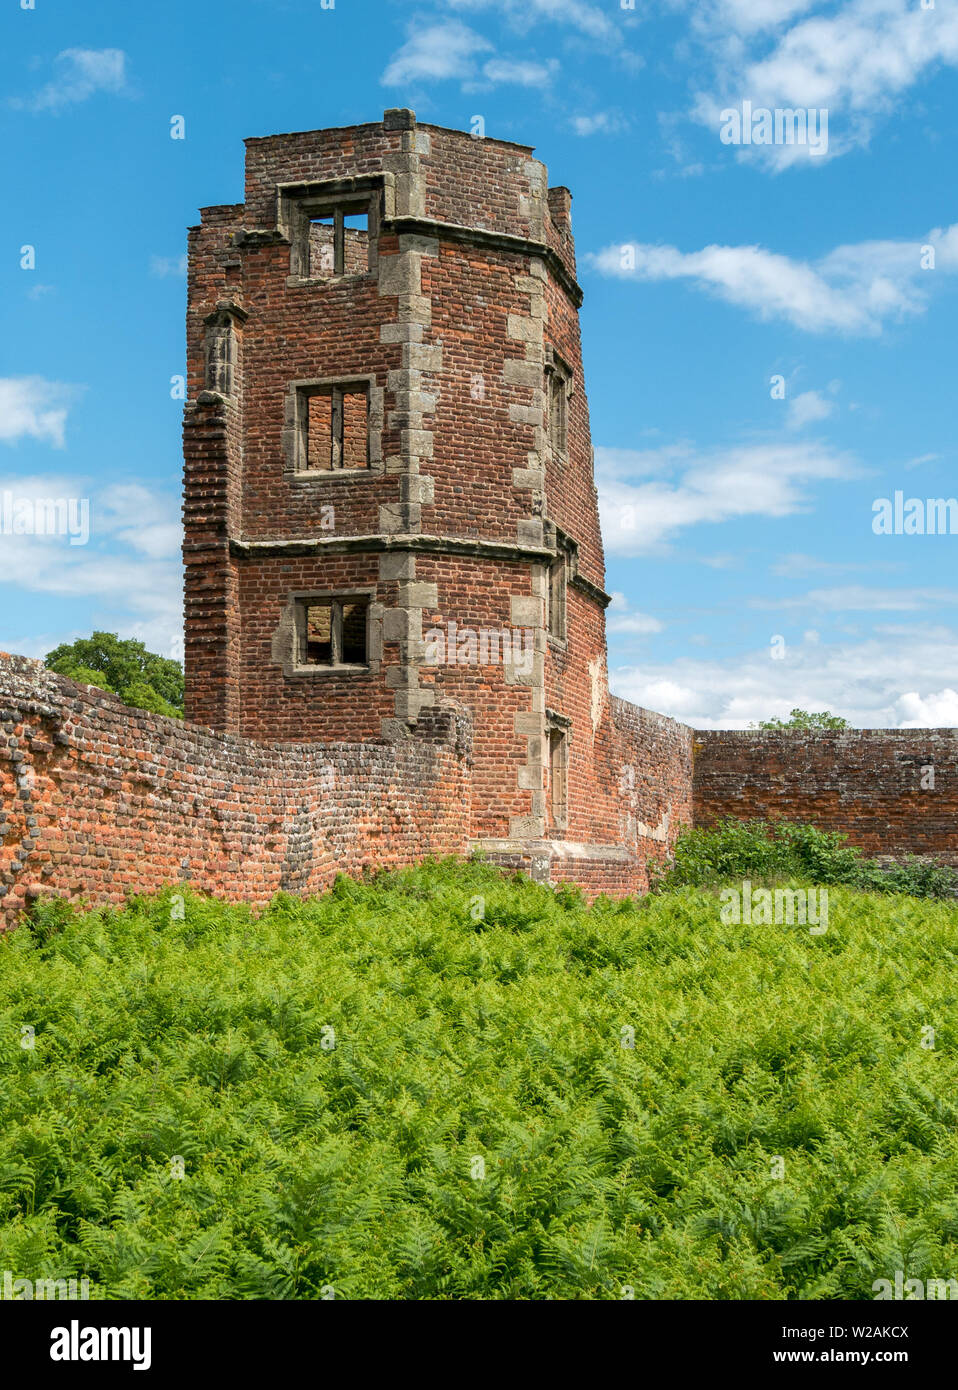 Old brick wall and ruined tower, Lady Jane Grey's House, Bradgate Park, Leicestershire, England, UK Stock Photo